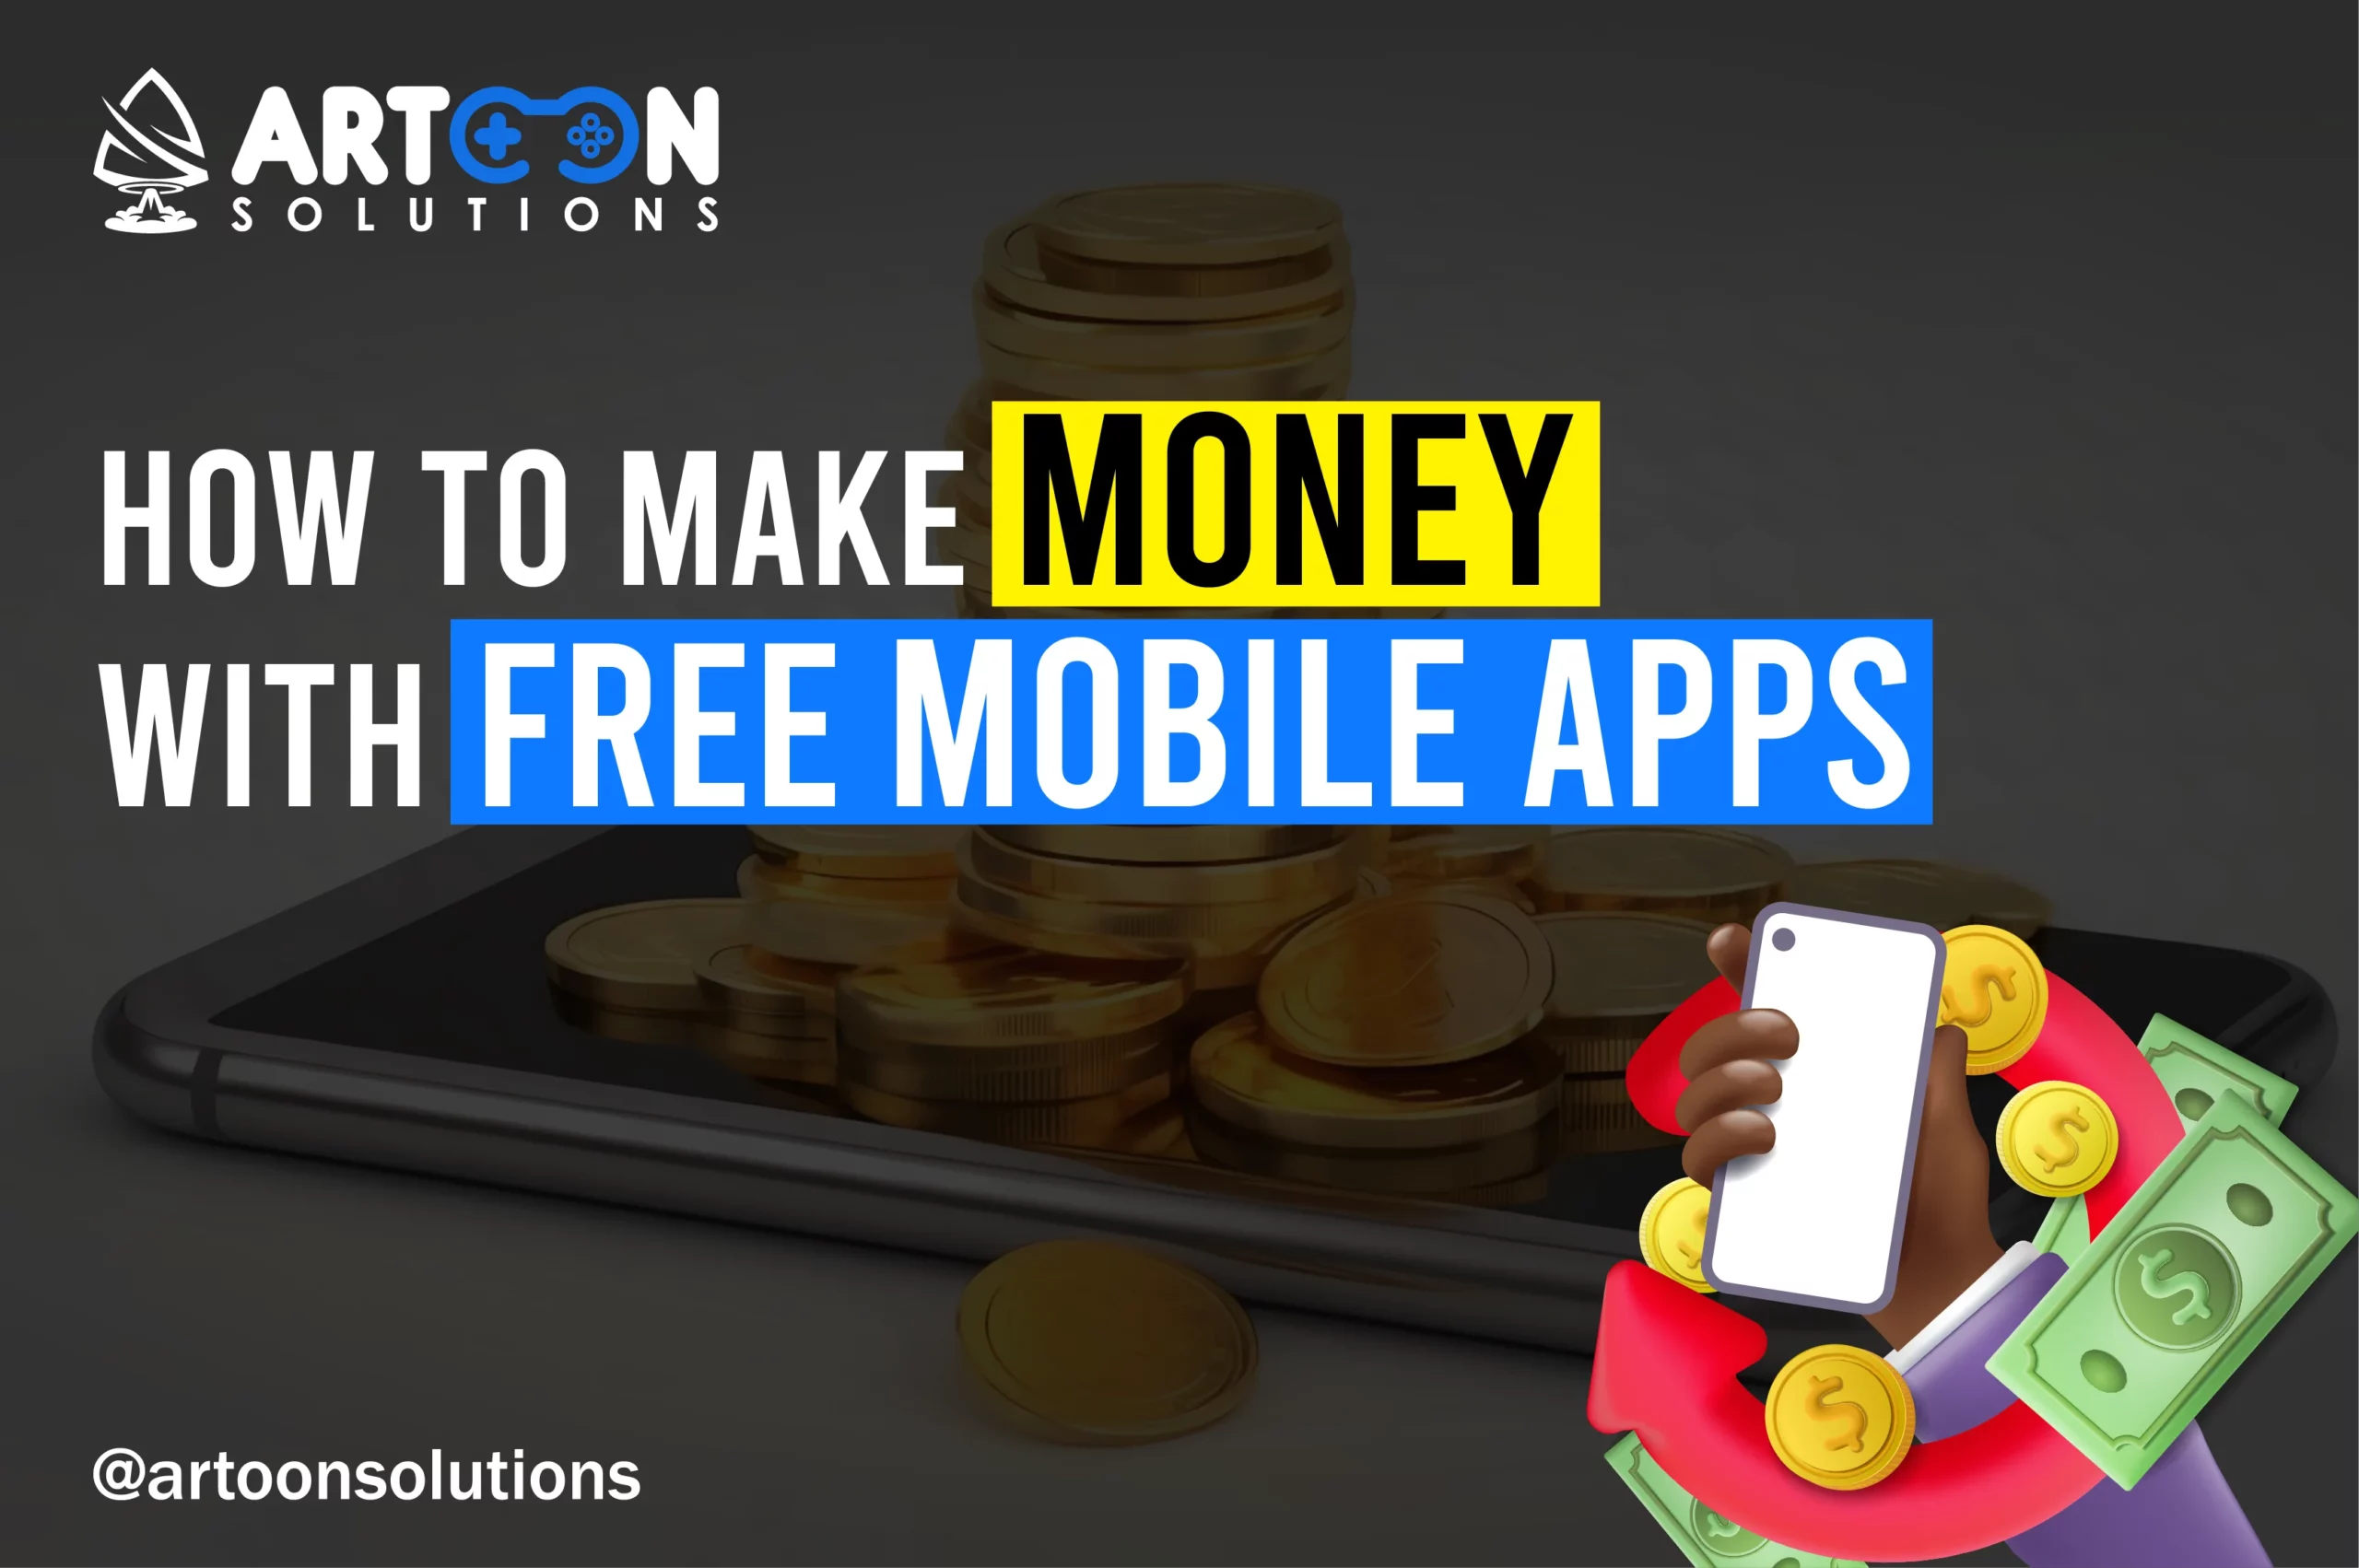 How to Make Money with Free Mobile Apps